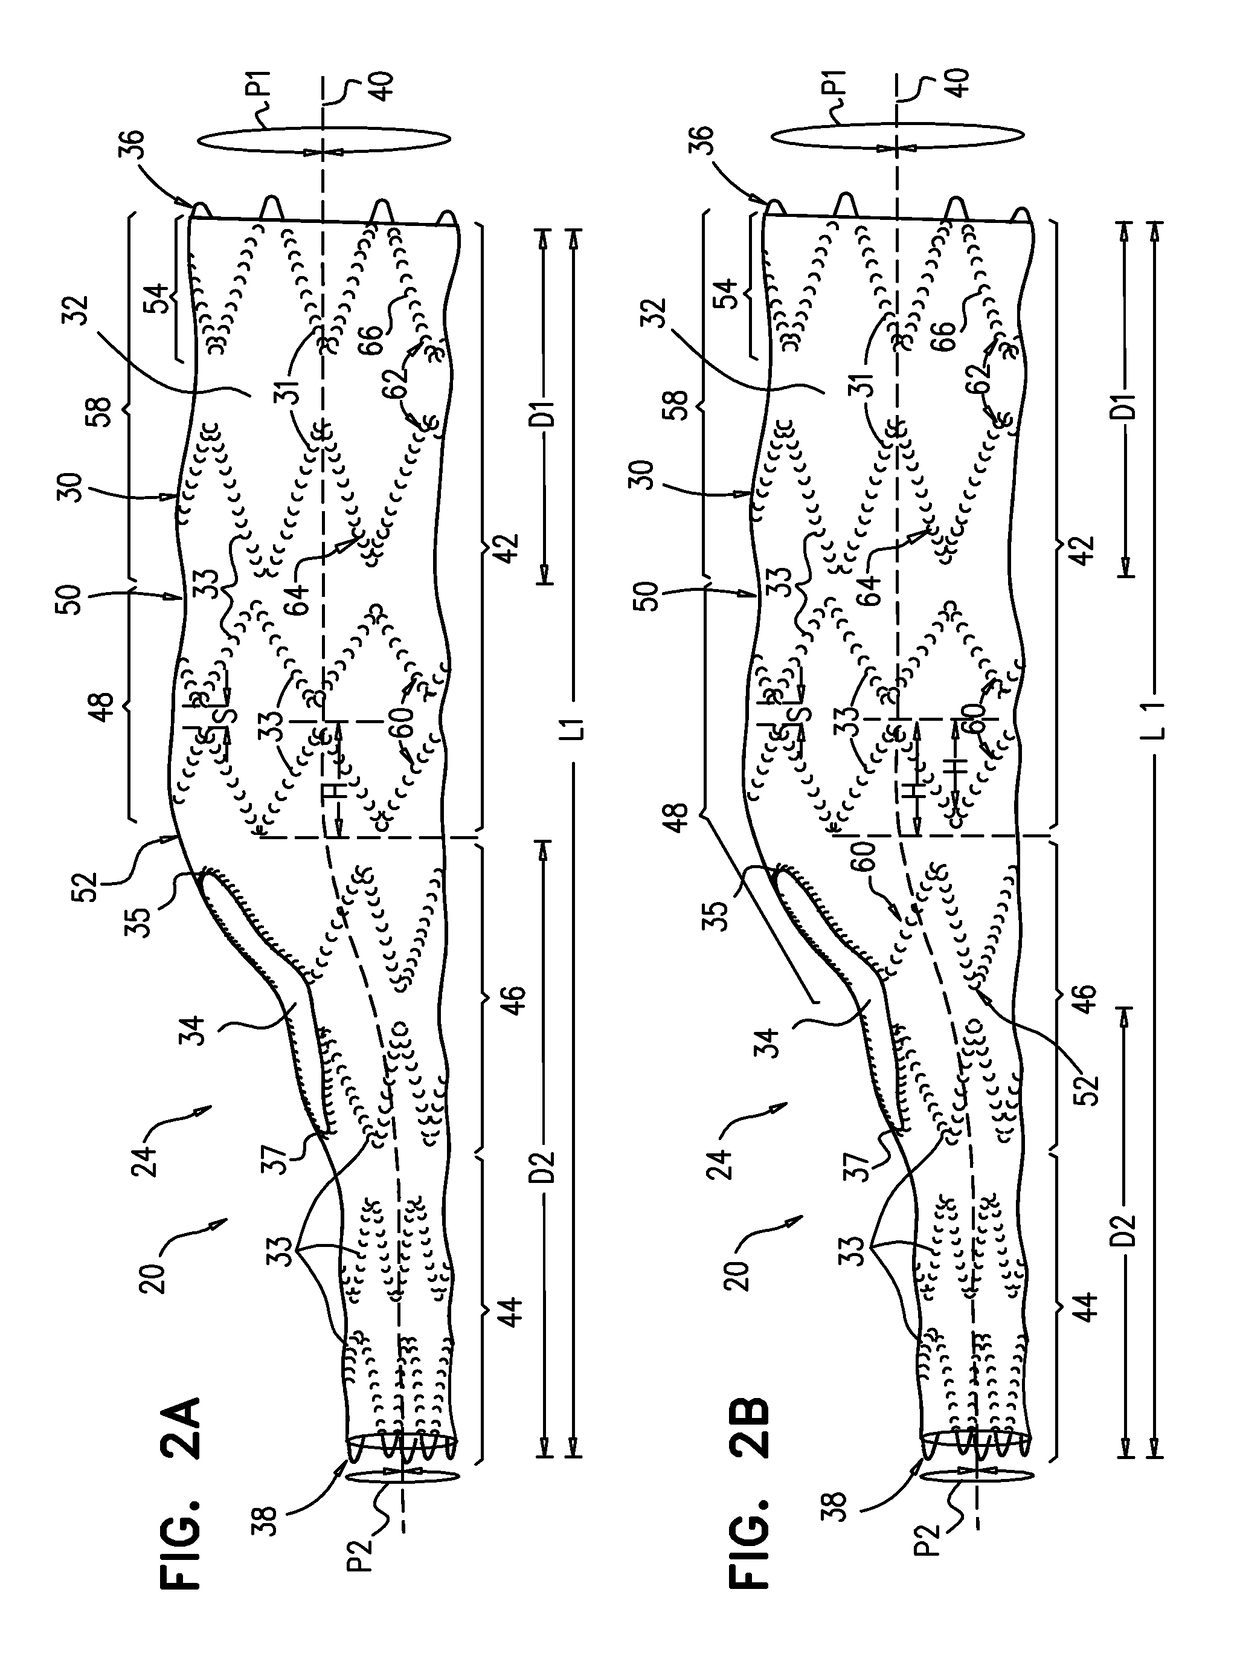 Multi-component stent-graft system for aortic dissections